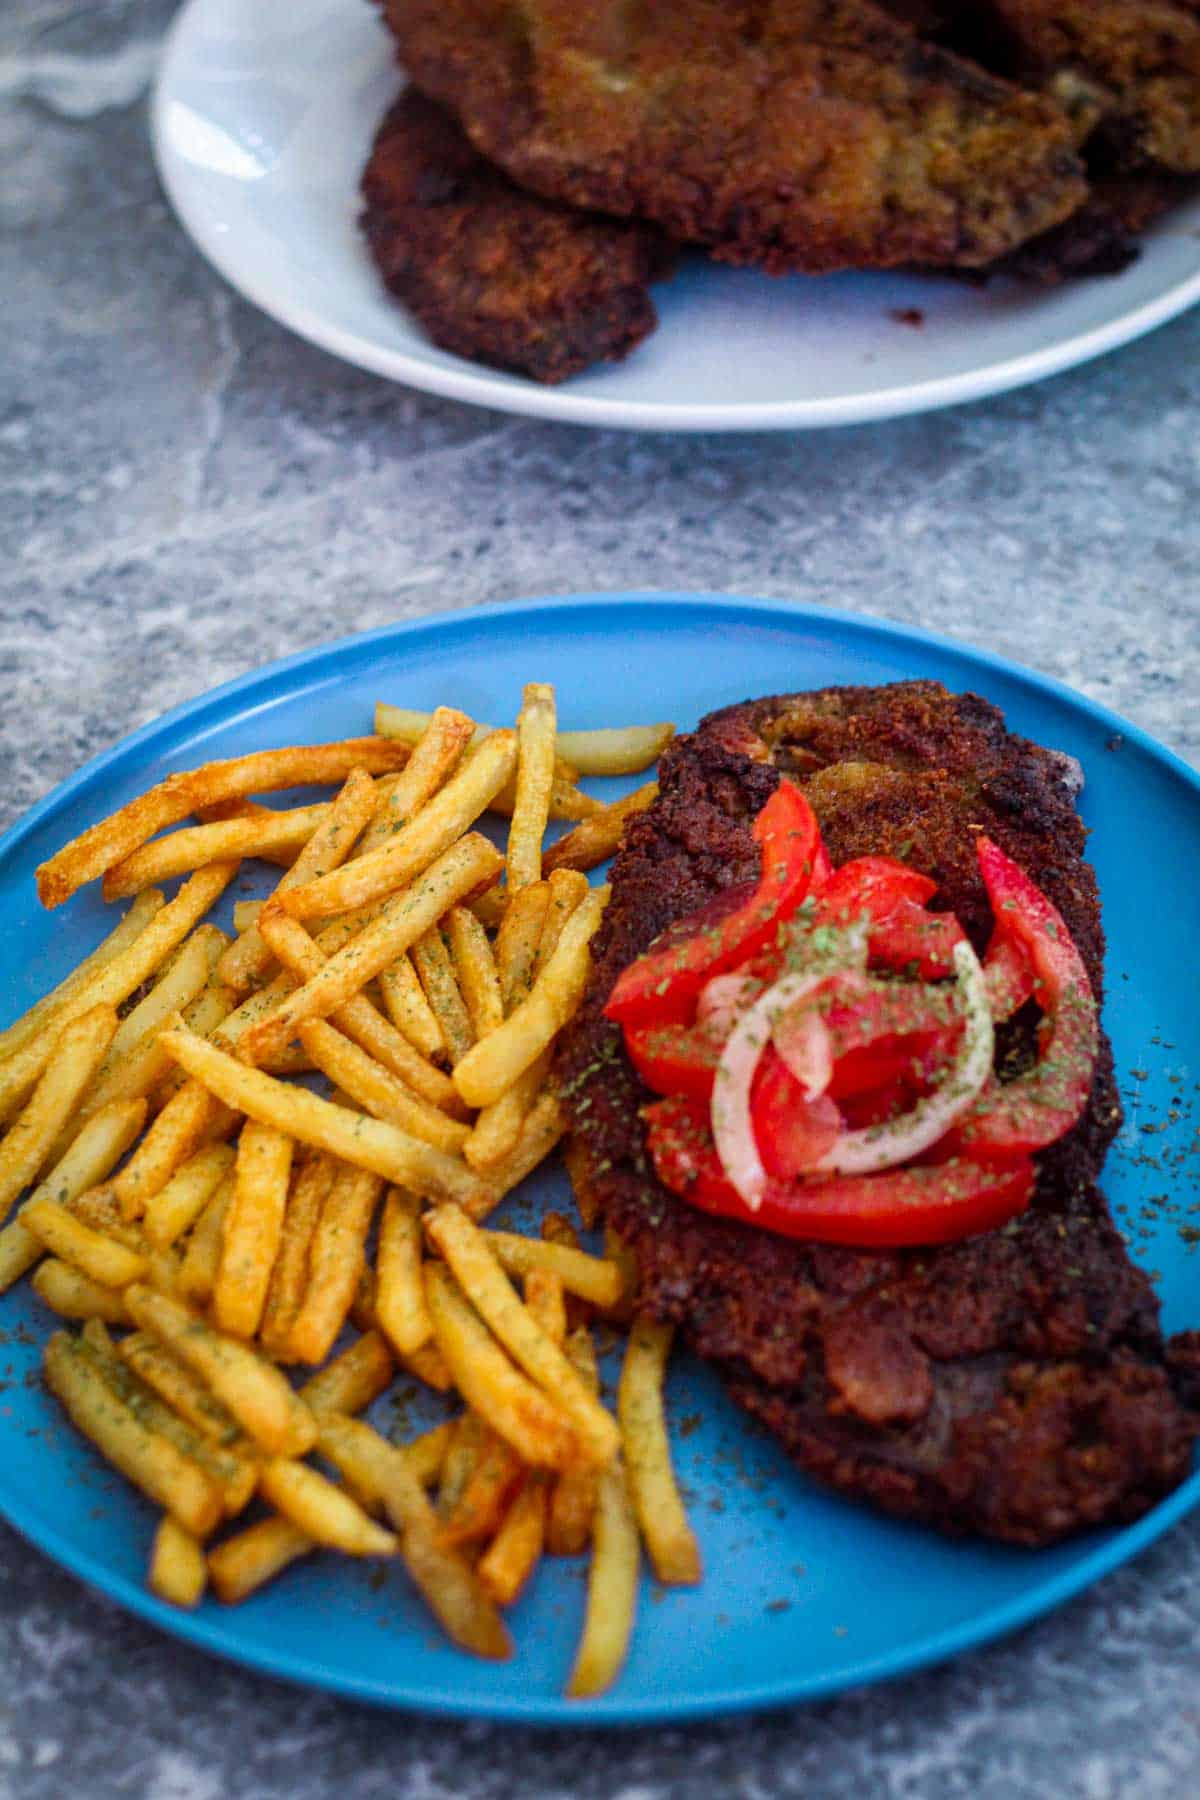 Milanesa steak served with french fries and topped with tomatoes, onions and garnished with some parsley.